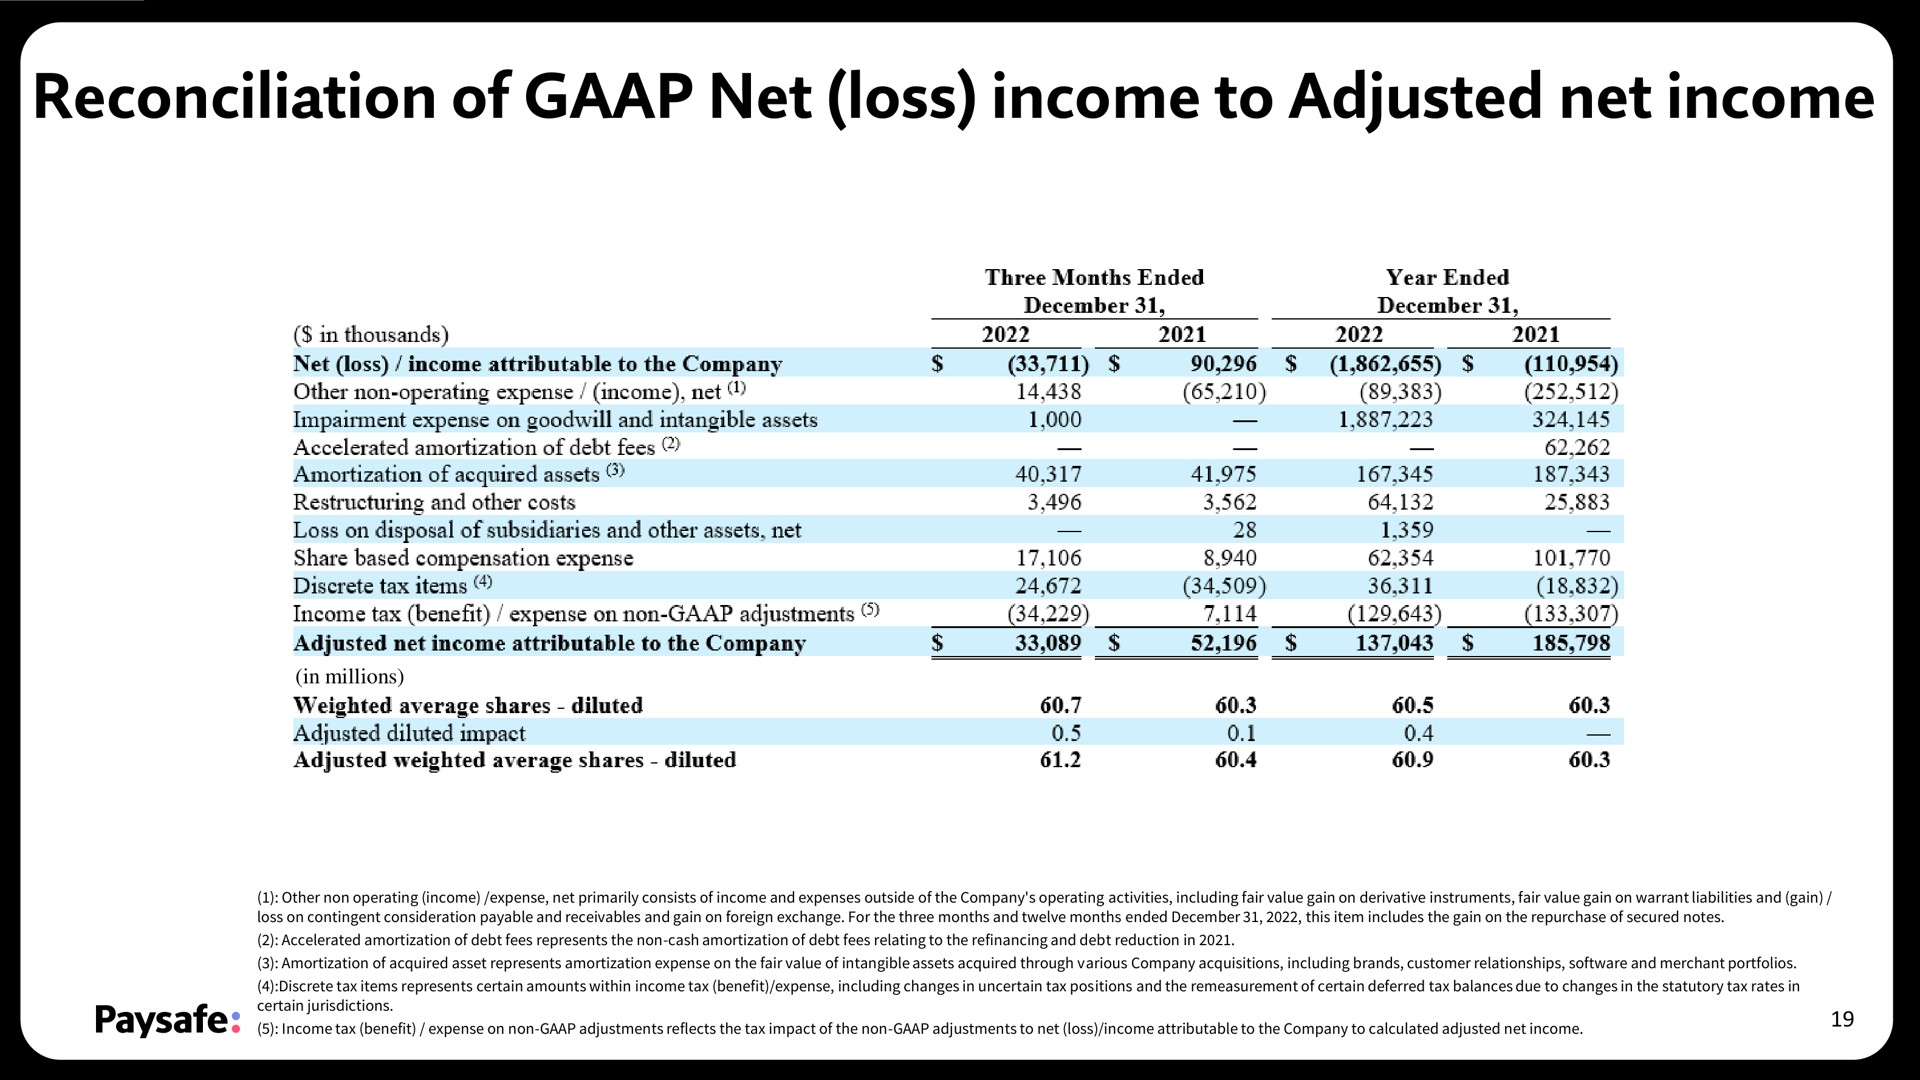 reconciliation of net loss income to adjusted net income | Paysafe